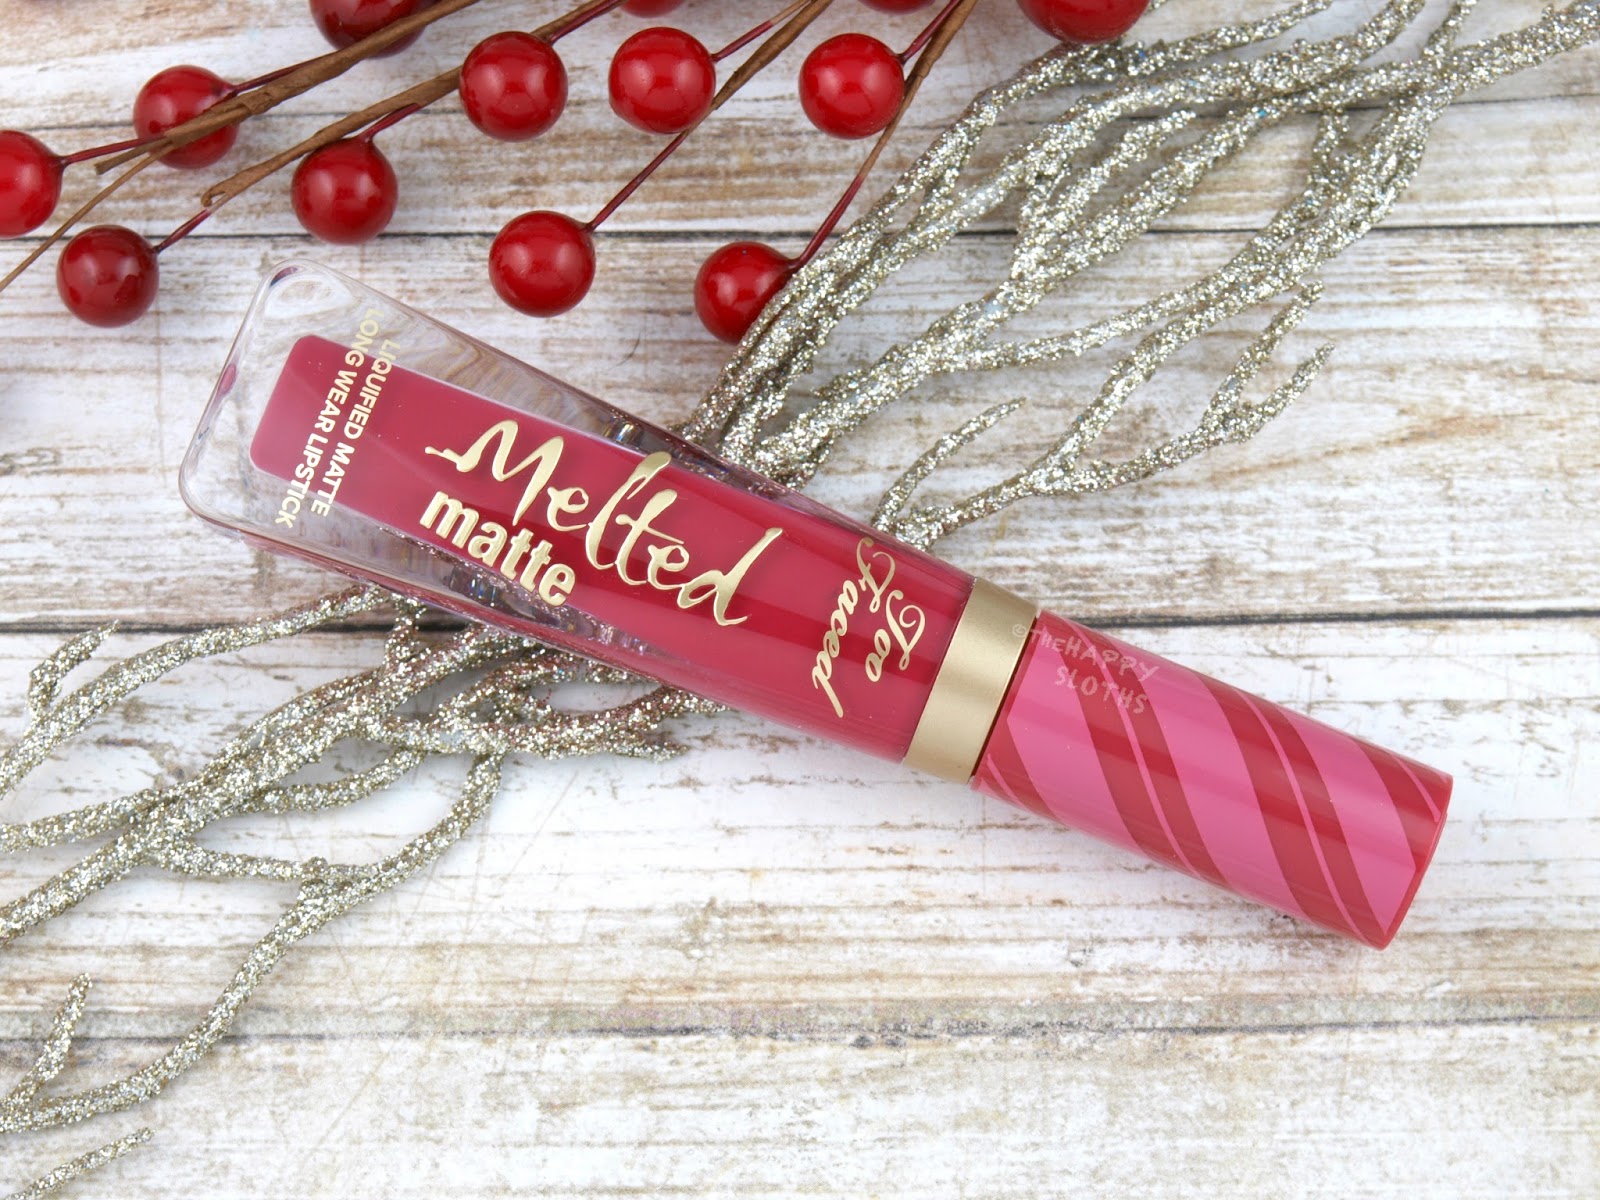 Too Faced Holiday 2016 Melted Matte in "Candy Cane"